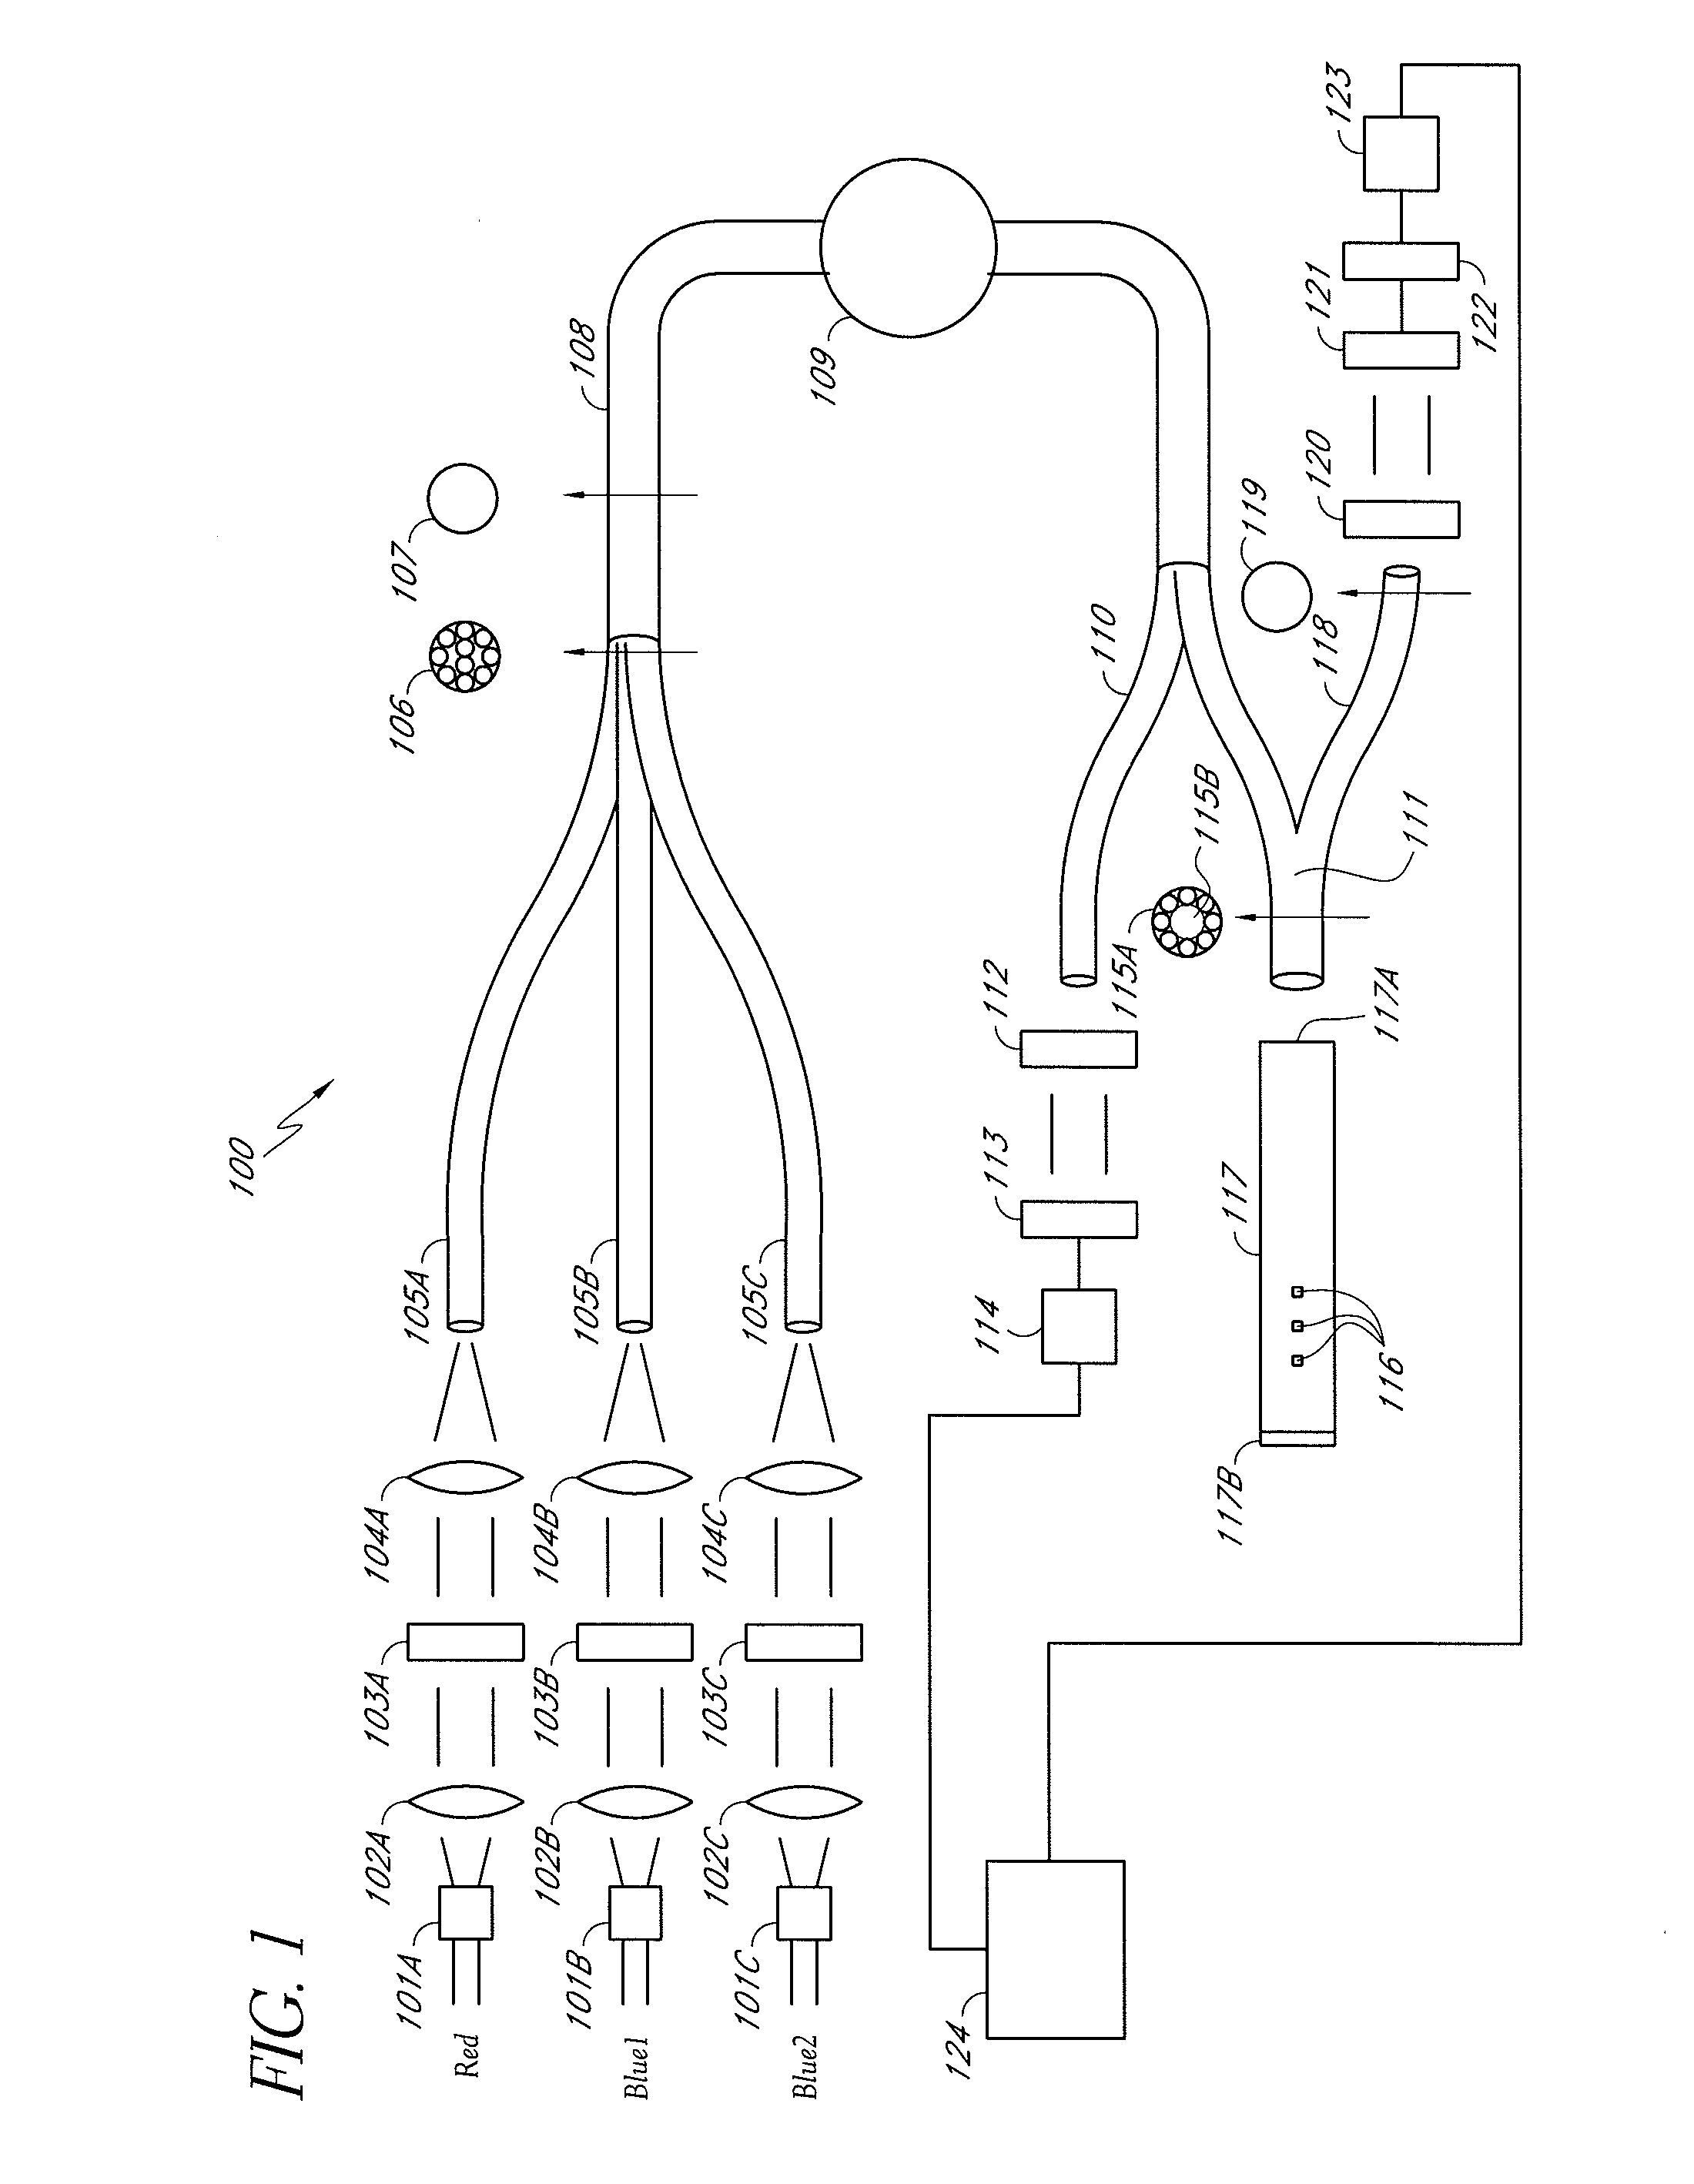 Optical systems and methods for ratiometric measurement of blood glucose concentration